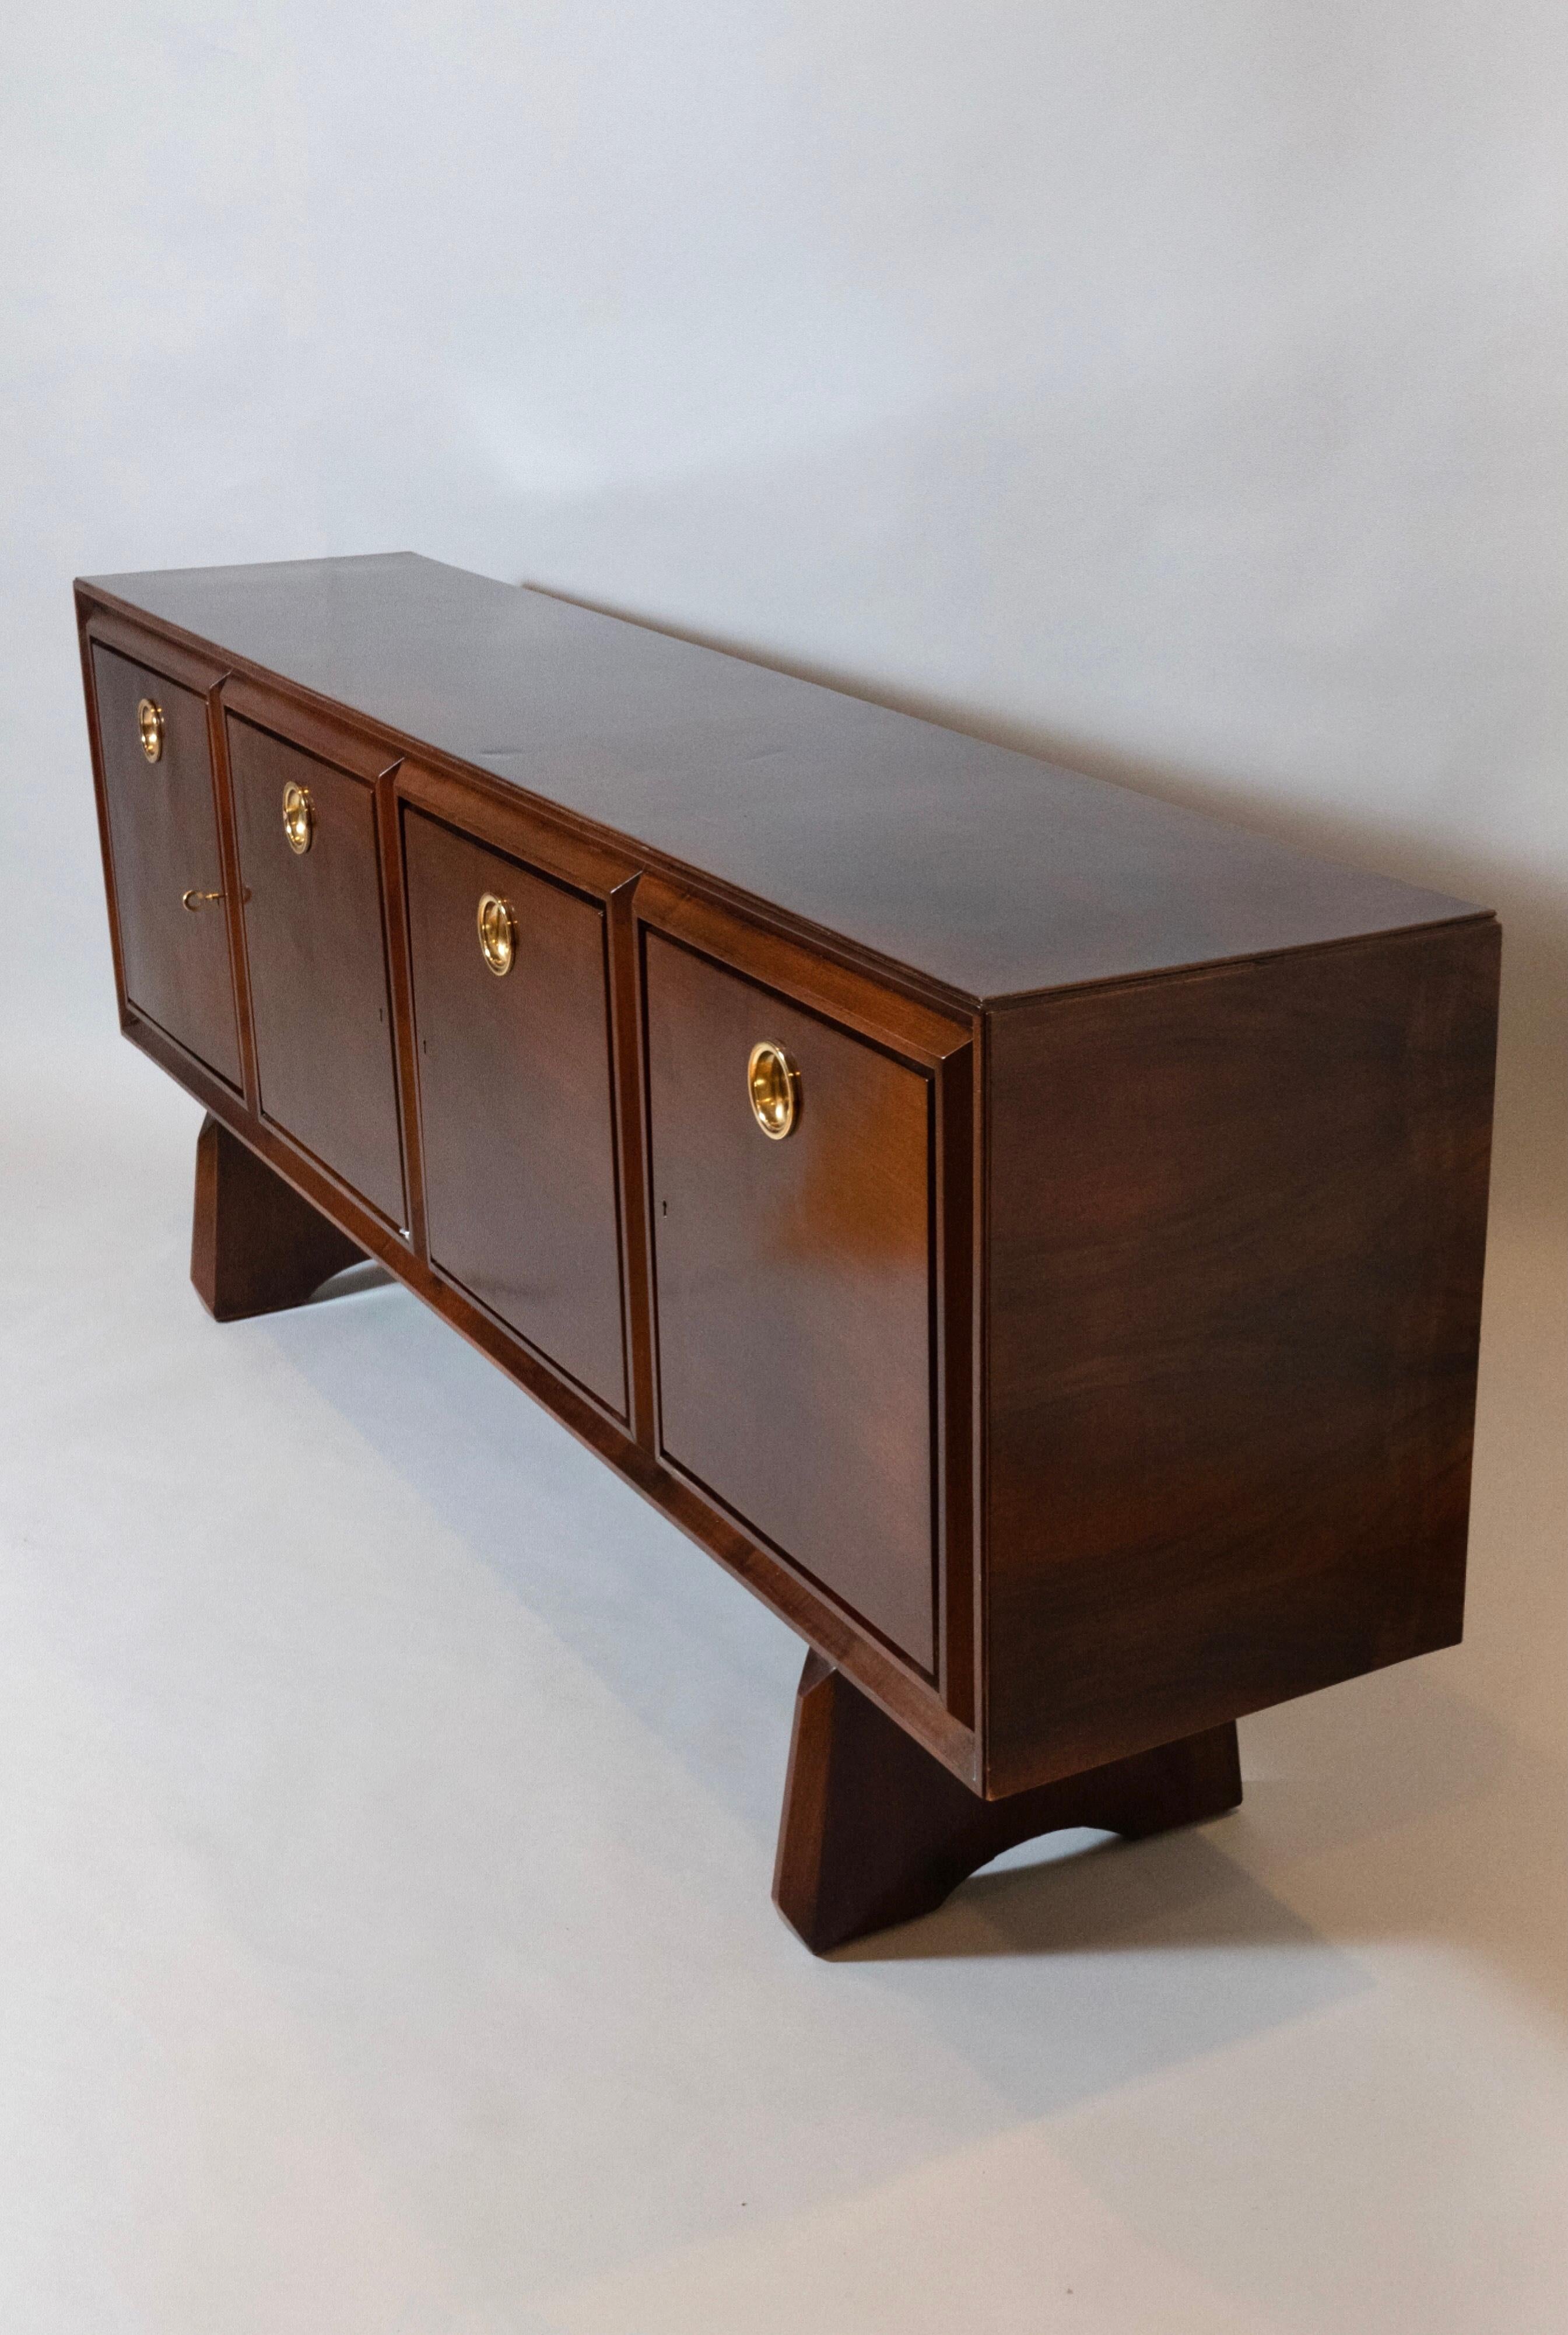 Paolo Buffa: Imposing Four-Door Cabinet in Walnut and Polished Brass, Italy 1950 For Sale 3